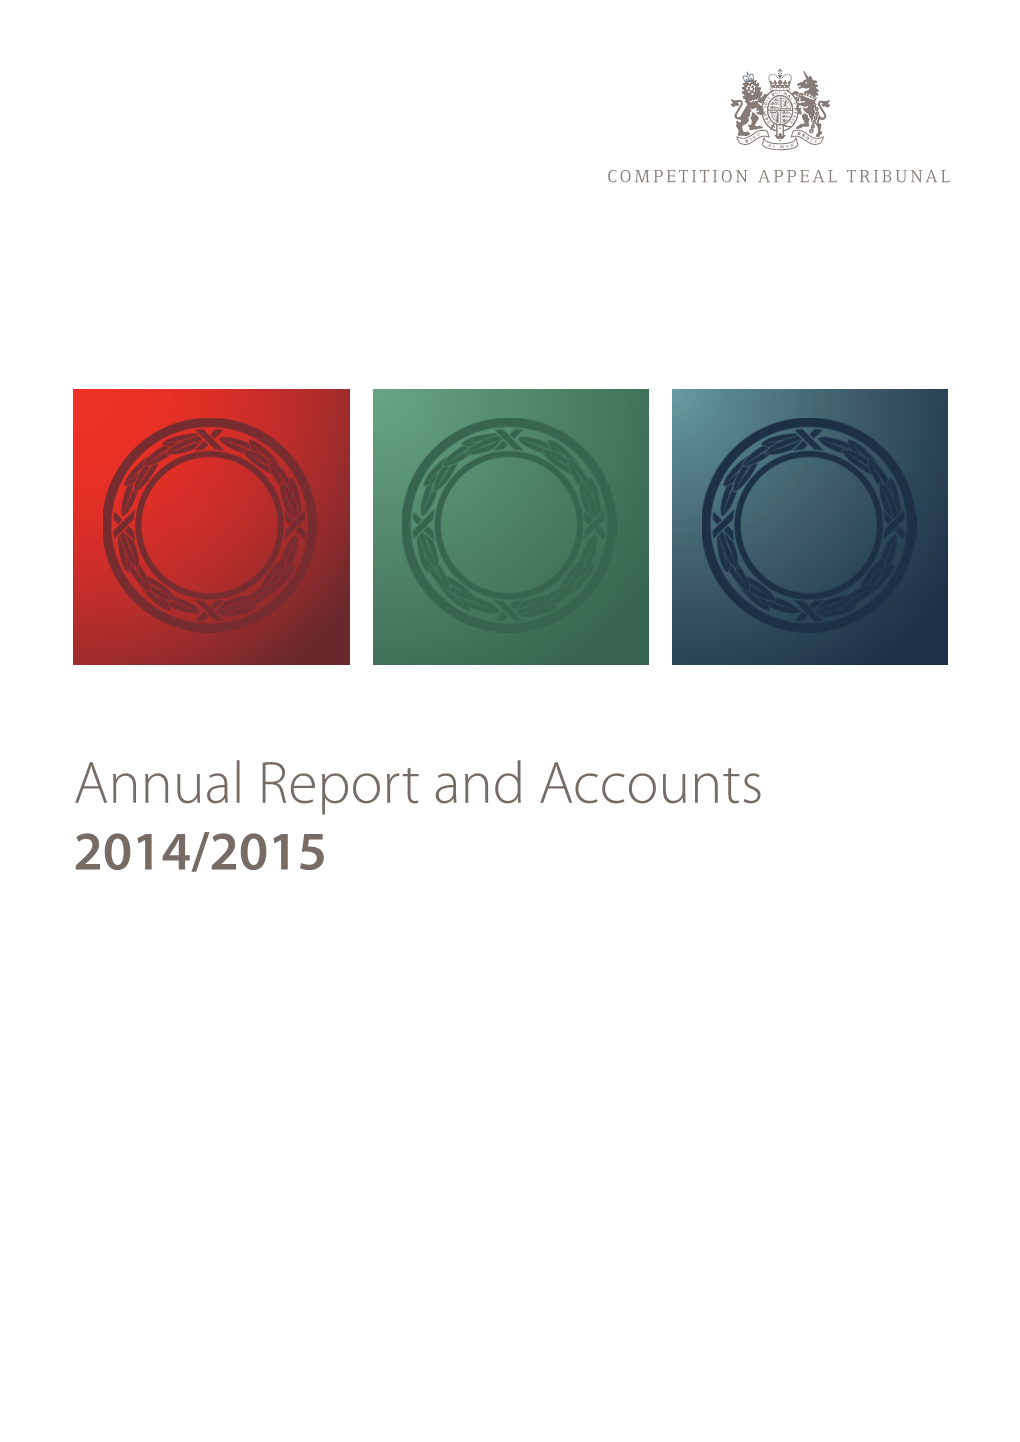 Competition Appeal Tribunal Annual Report and Accounts 2014/15